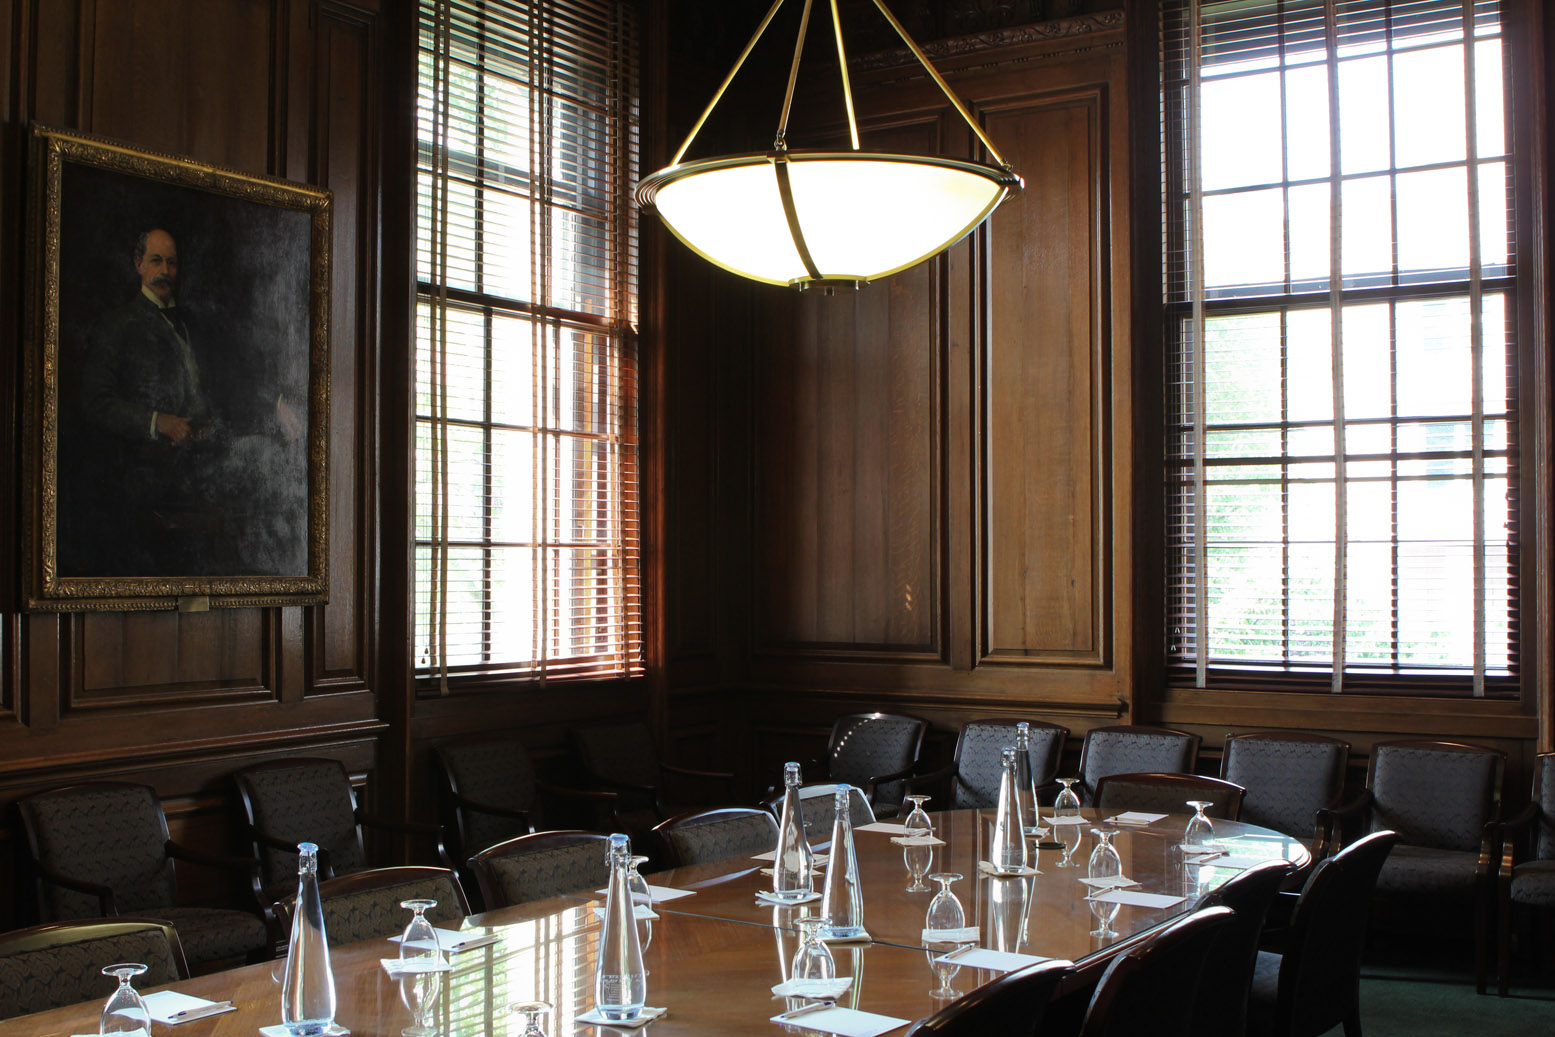 A long conference table set with glasses and water bottles sits in the middle of a wood-paneled room. Chairs are lined around the table and against the walls.